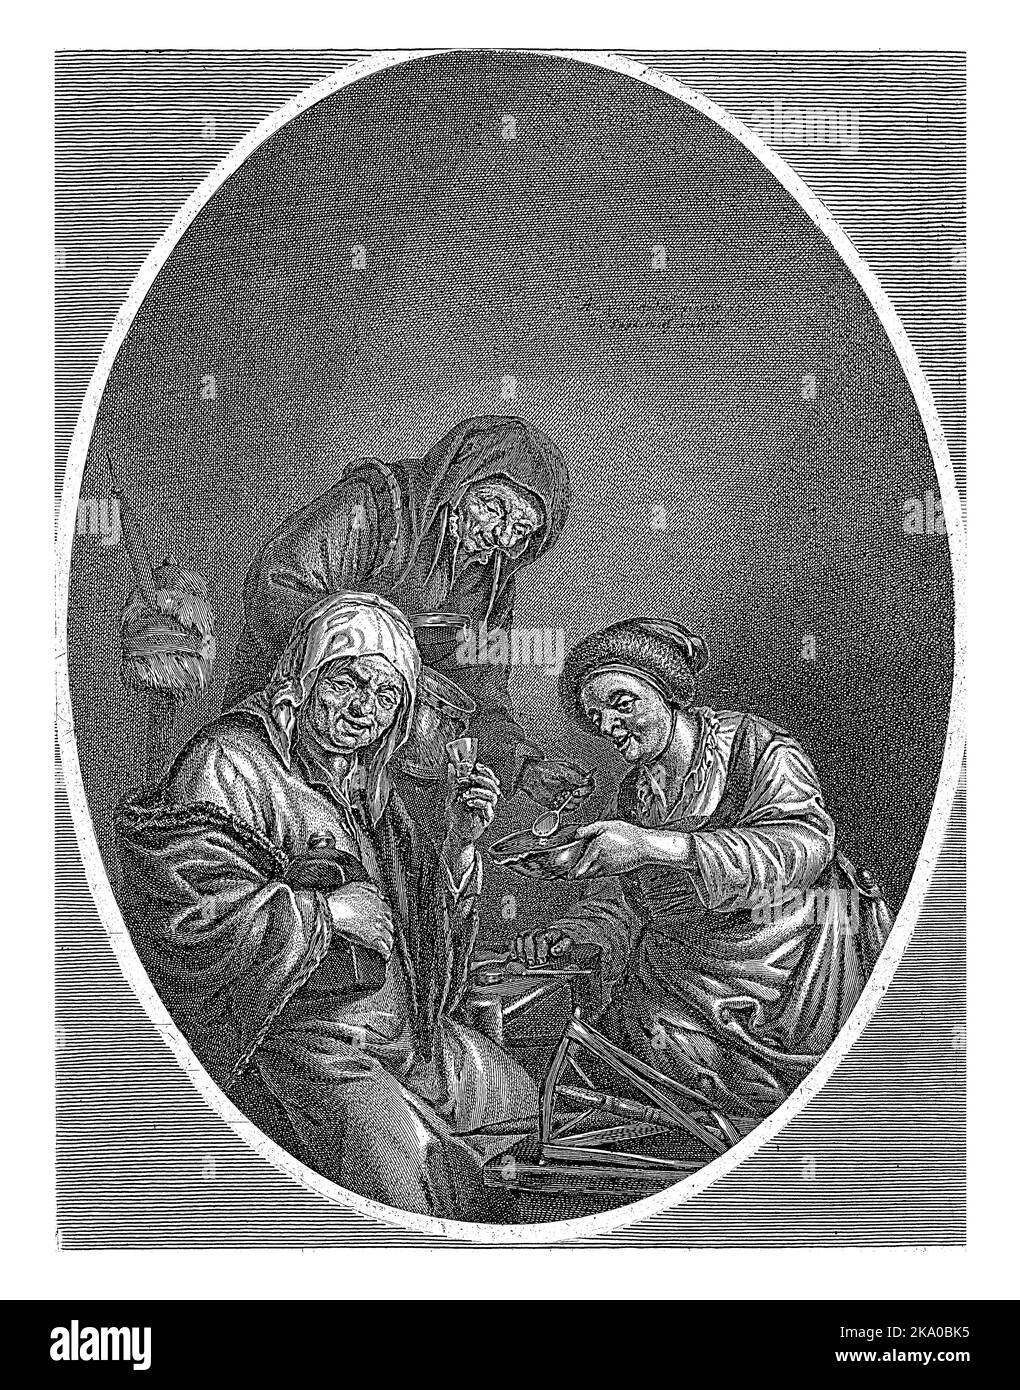 Three Old Women, Jonas Suyderhoef, after Adriaen van Ostade, c. 1623 - 1686 Three old women together. The woman on the left raises a glass, clutching Stock Photo